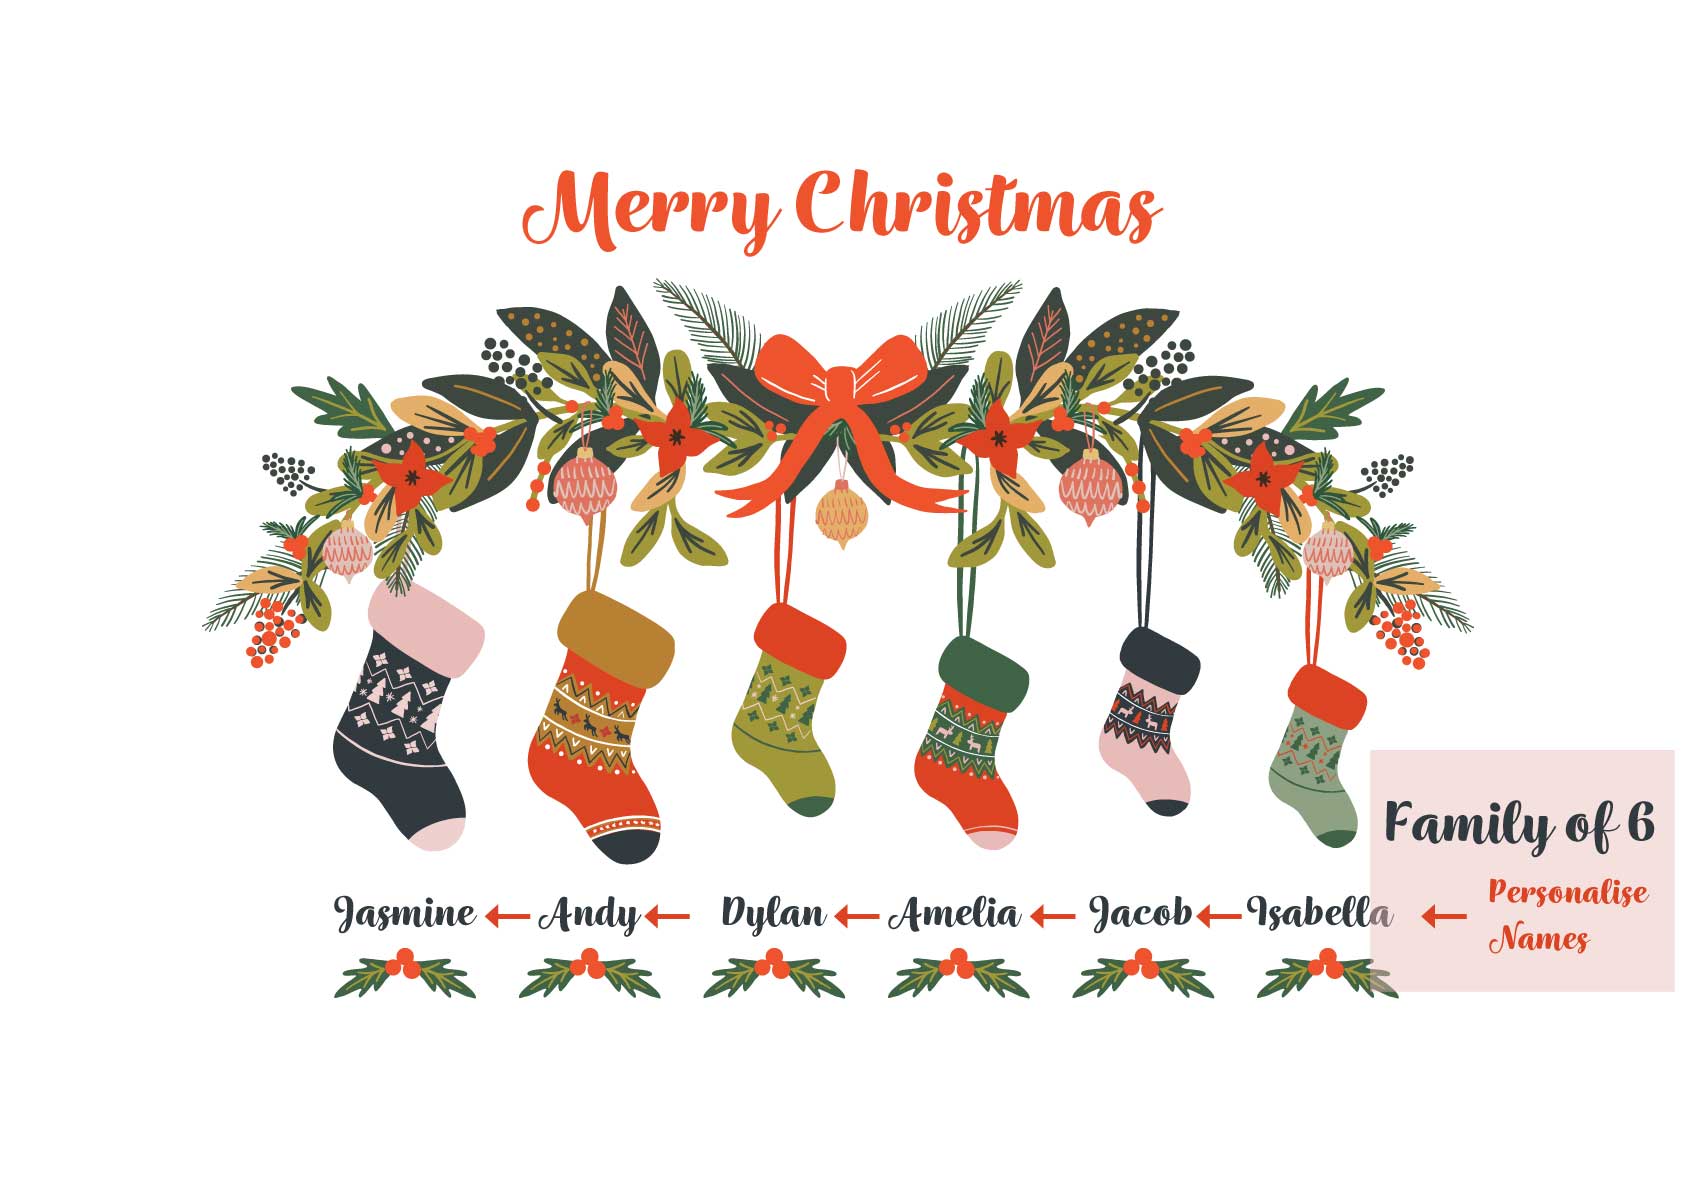 Family of 6 Christmas gift idea - Customisable personalised name Christmas Print by Studio Peers. Merry Christmas decoration with Stockings and personalised family names.